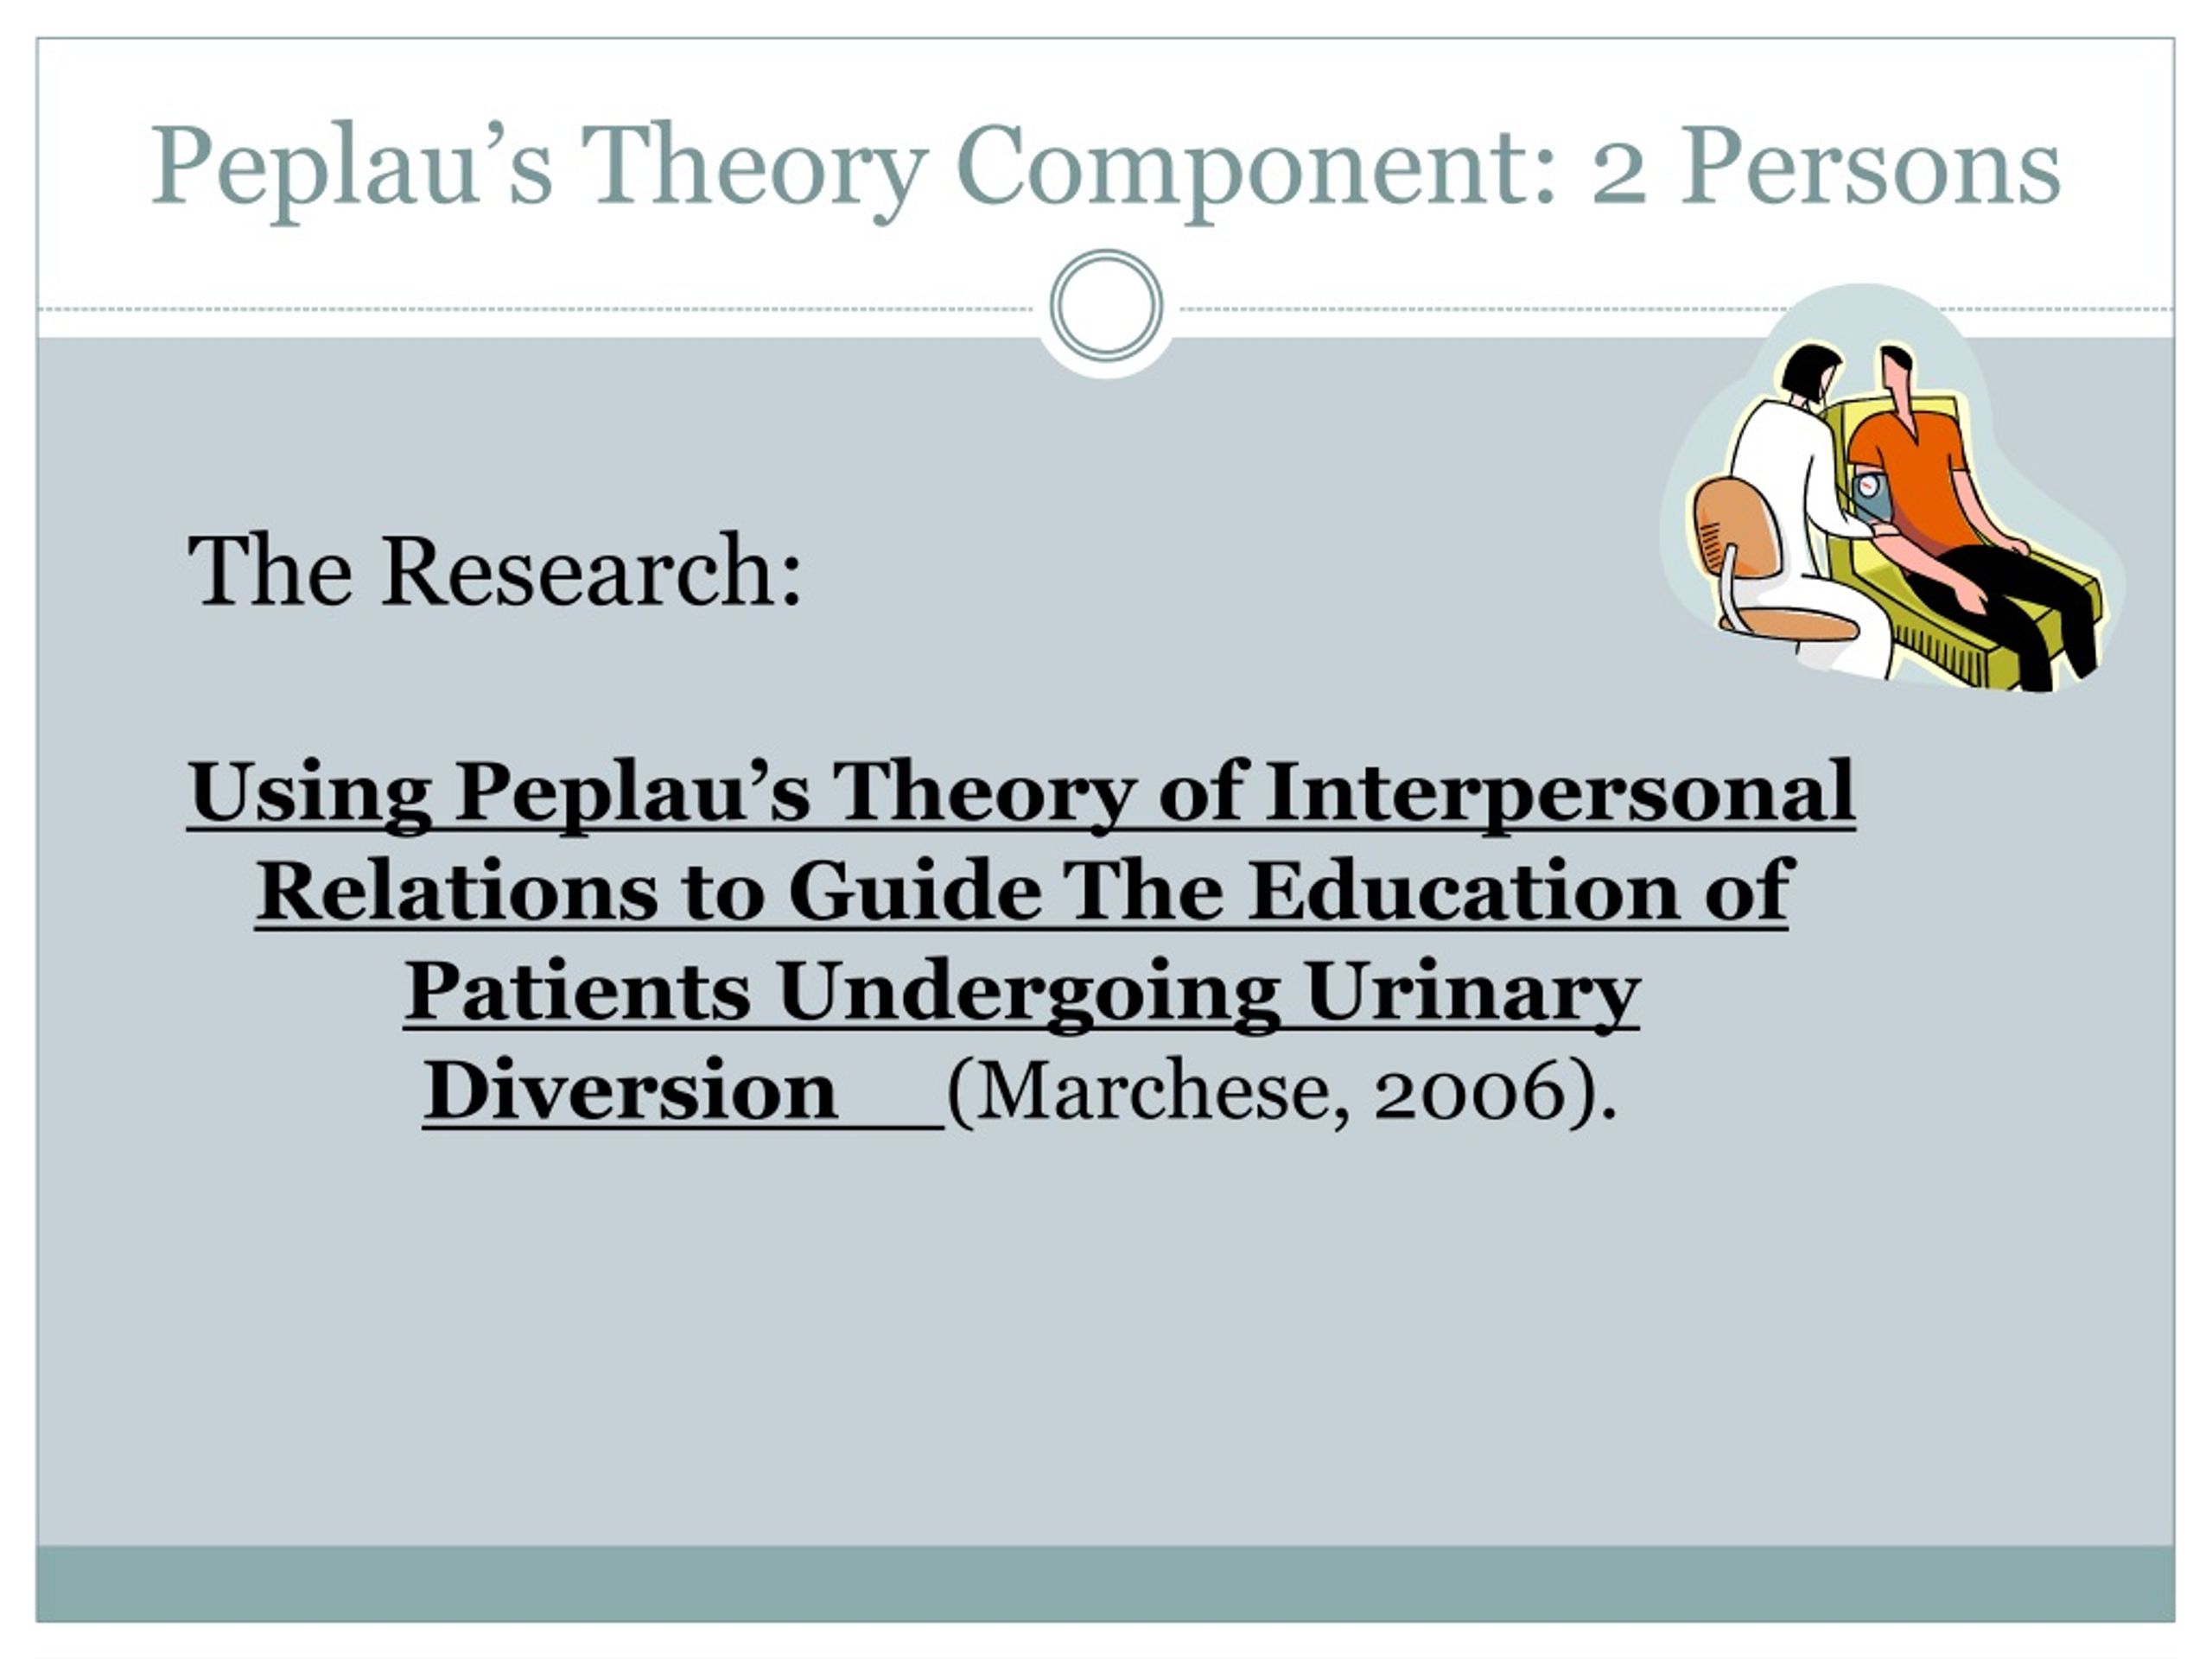 describe the phases of the nurse-patient relationship as defined by peplau